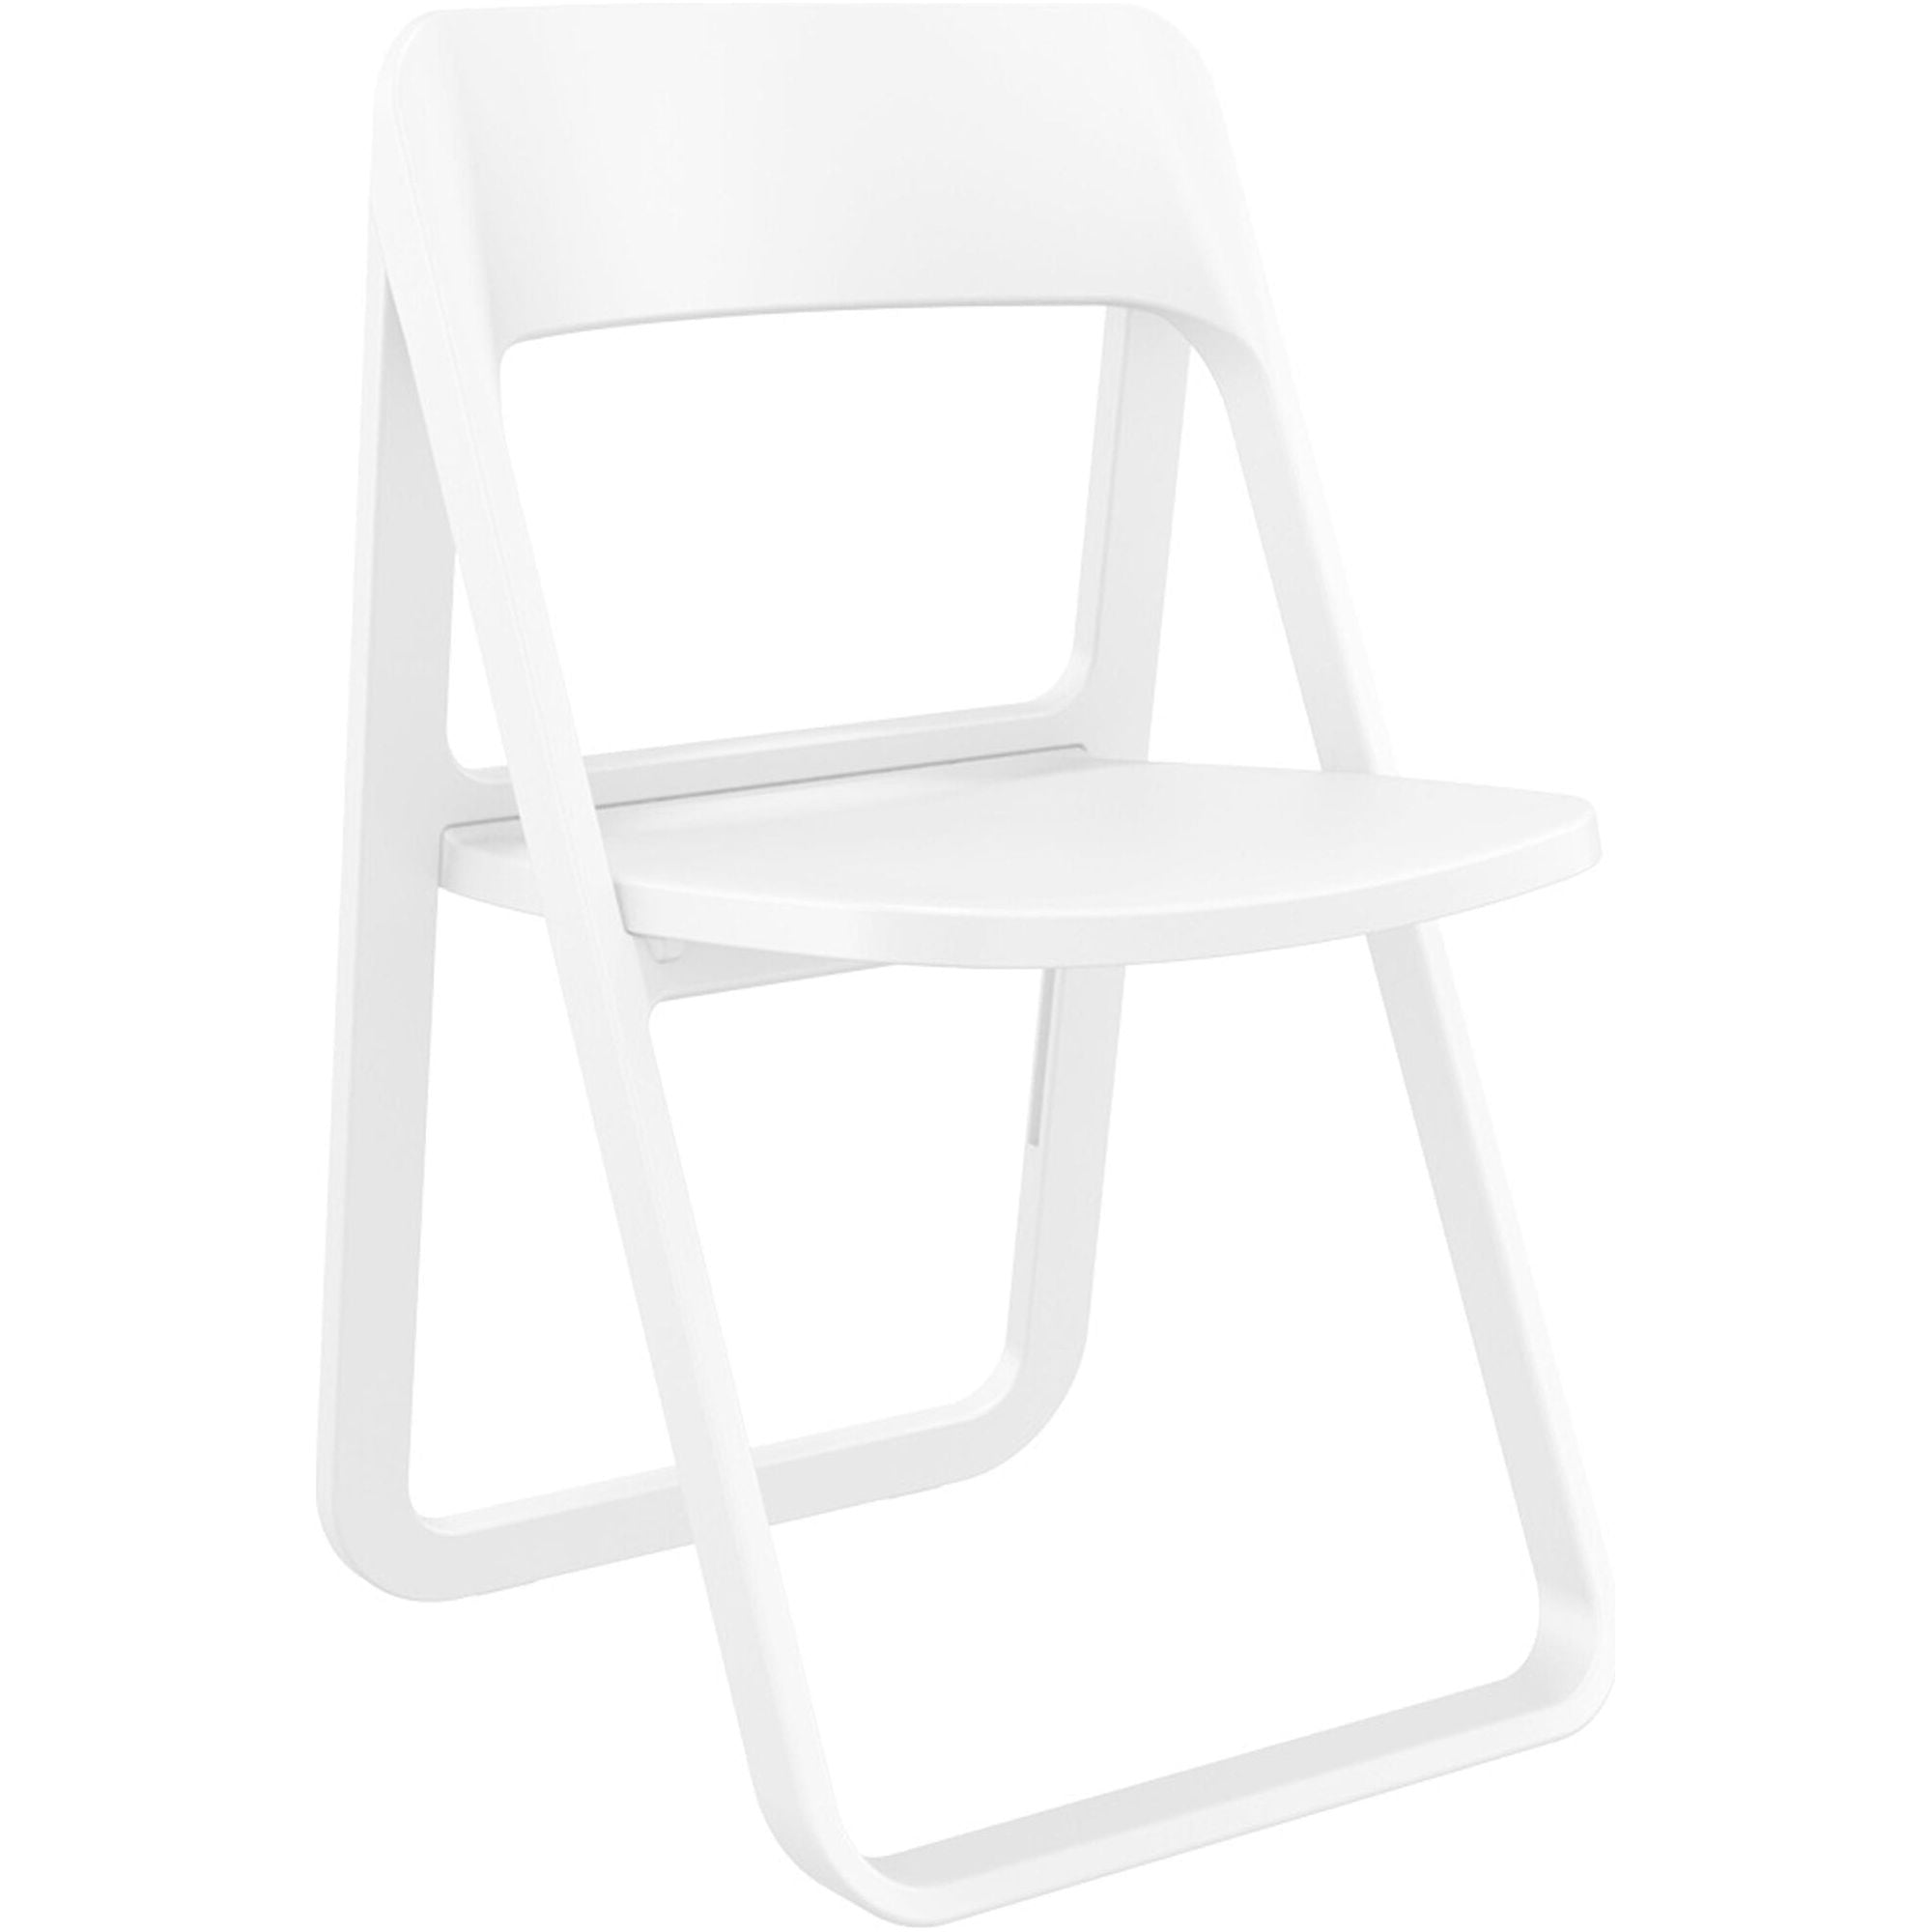 Garbar Droom folding chair indoors, outdoor white